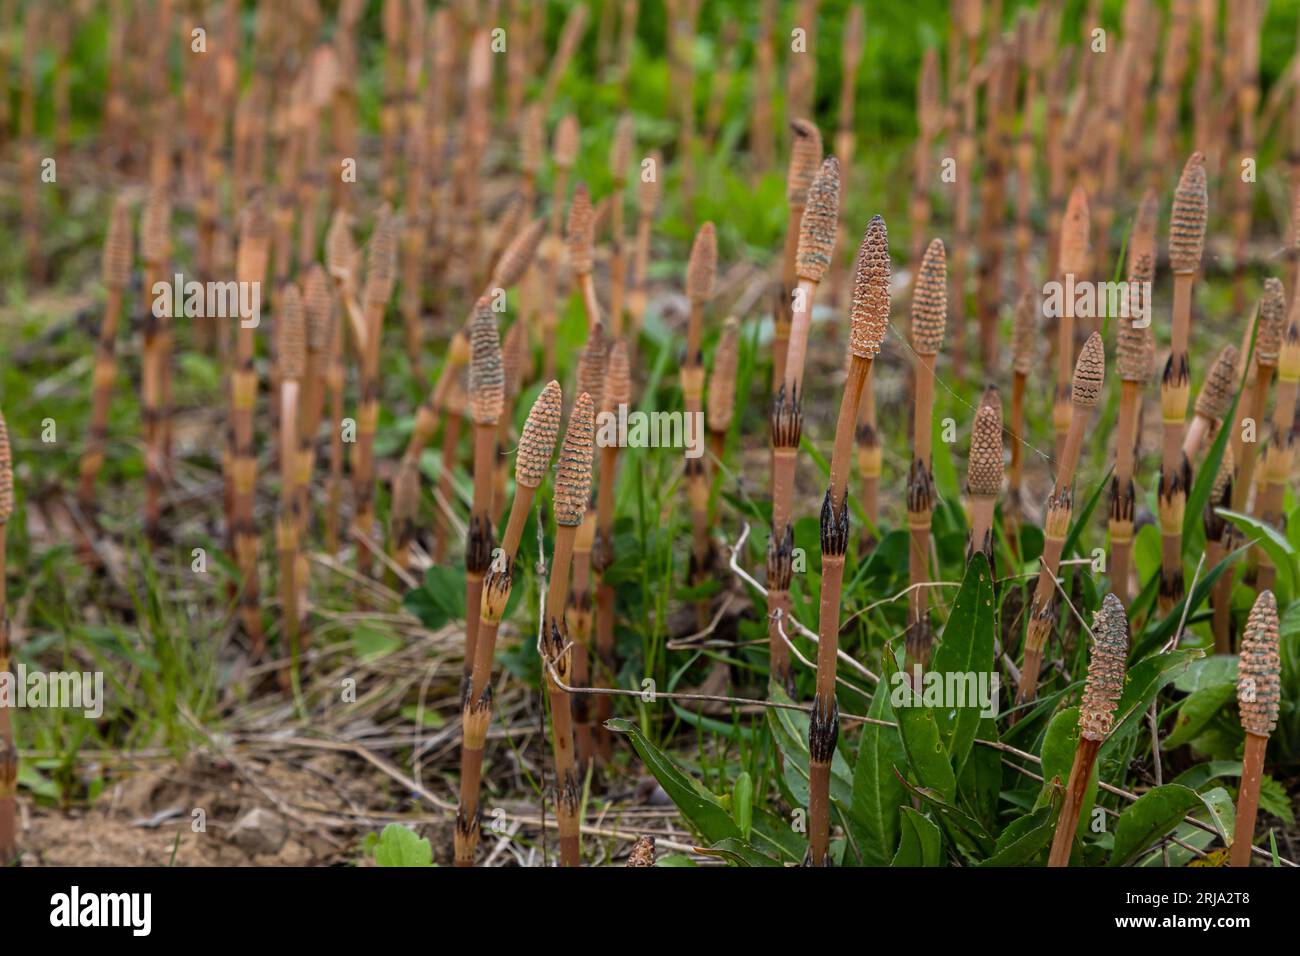 Equisetum arvense, the field horsetail or common horsetail, is an herbaceous perennial plant of the family Equisetaceae. Horsetail plant Equisetum arv Stock Photo